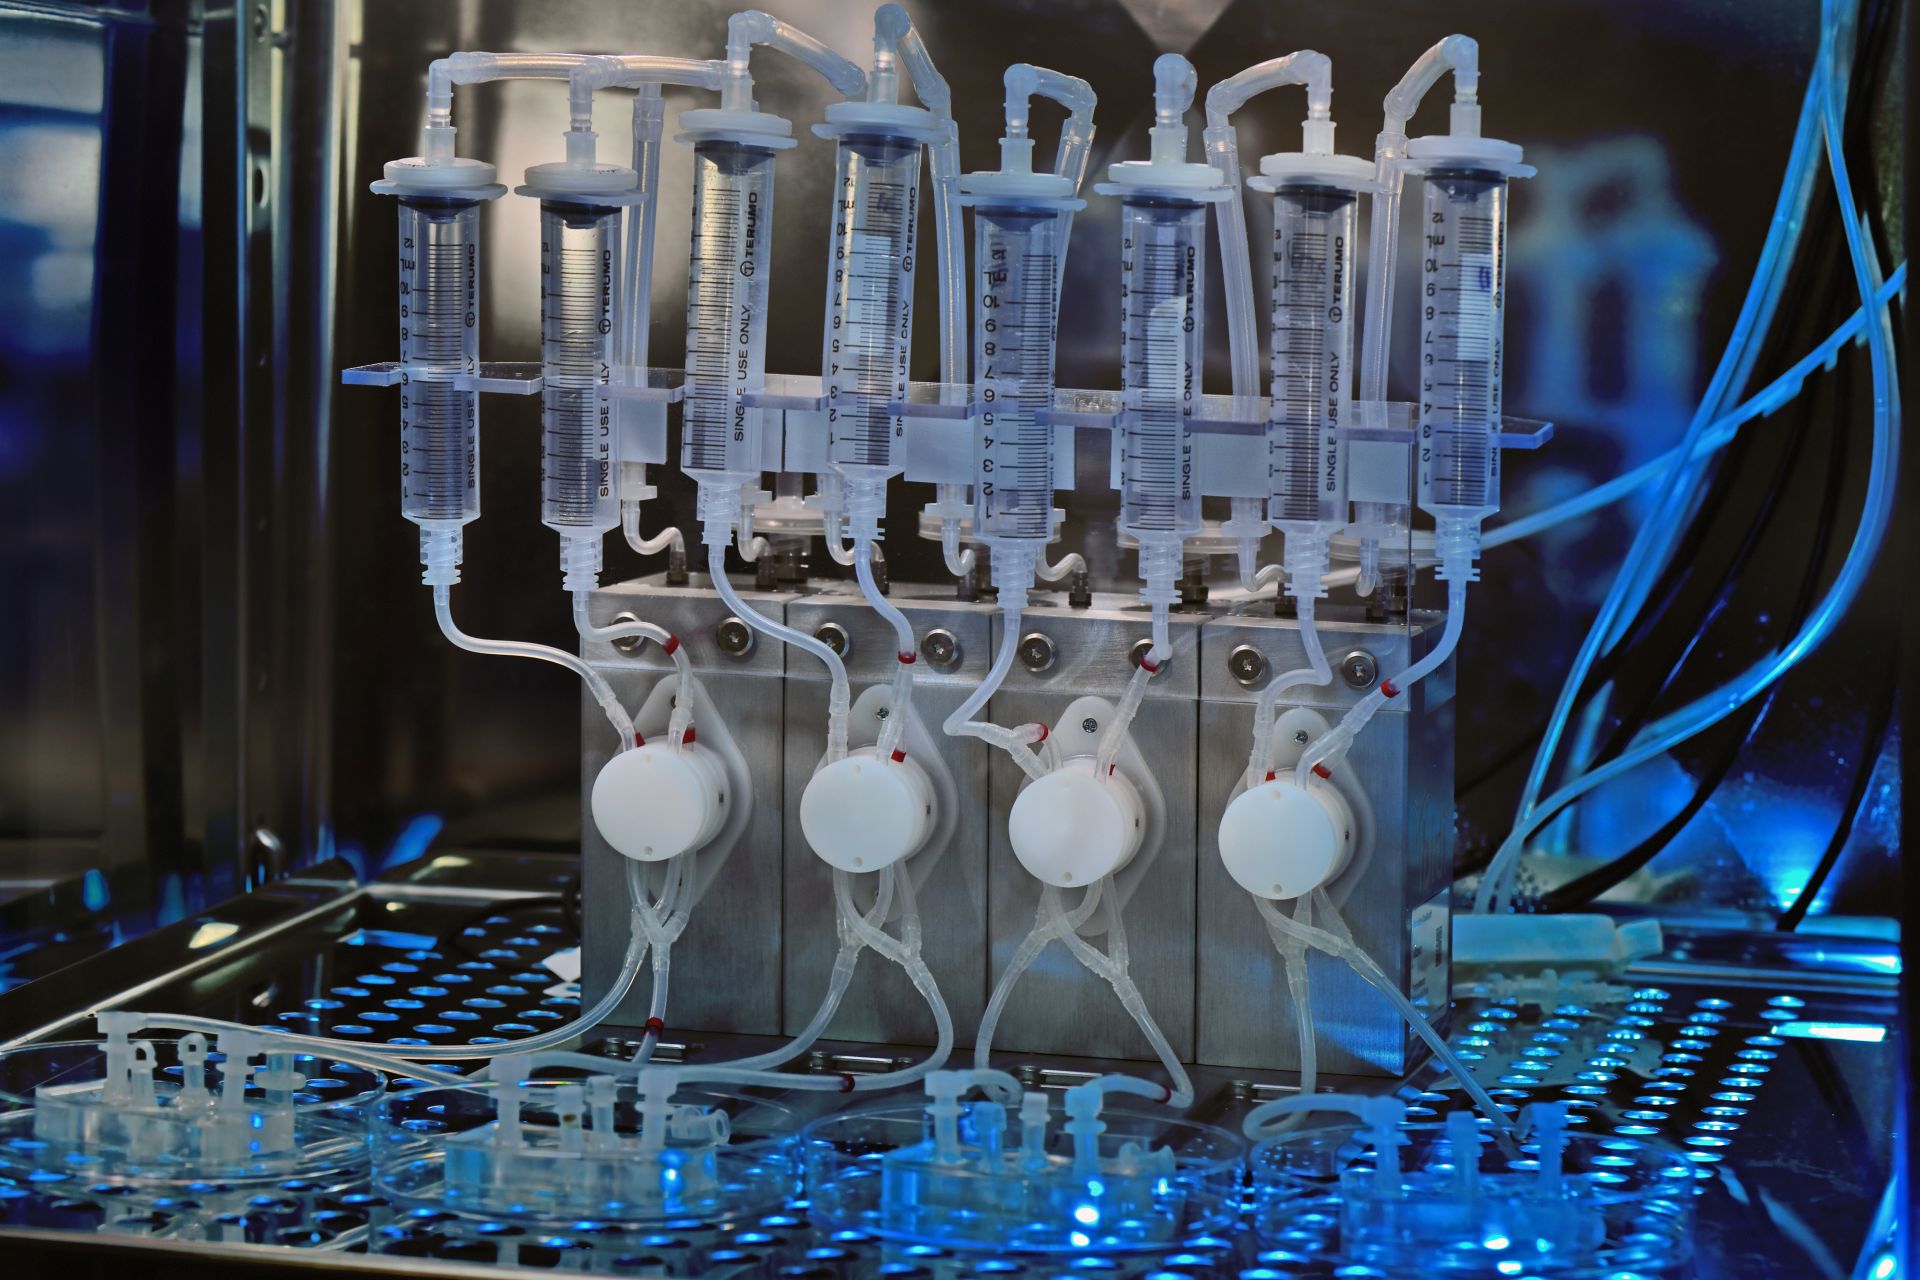 Parallel, continuous perfusion of four organ-on-chip systems.